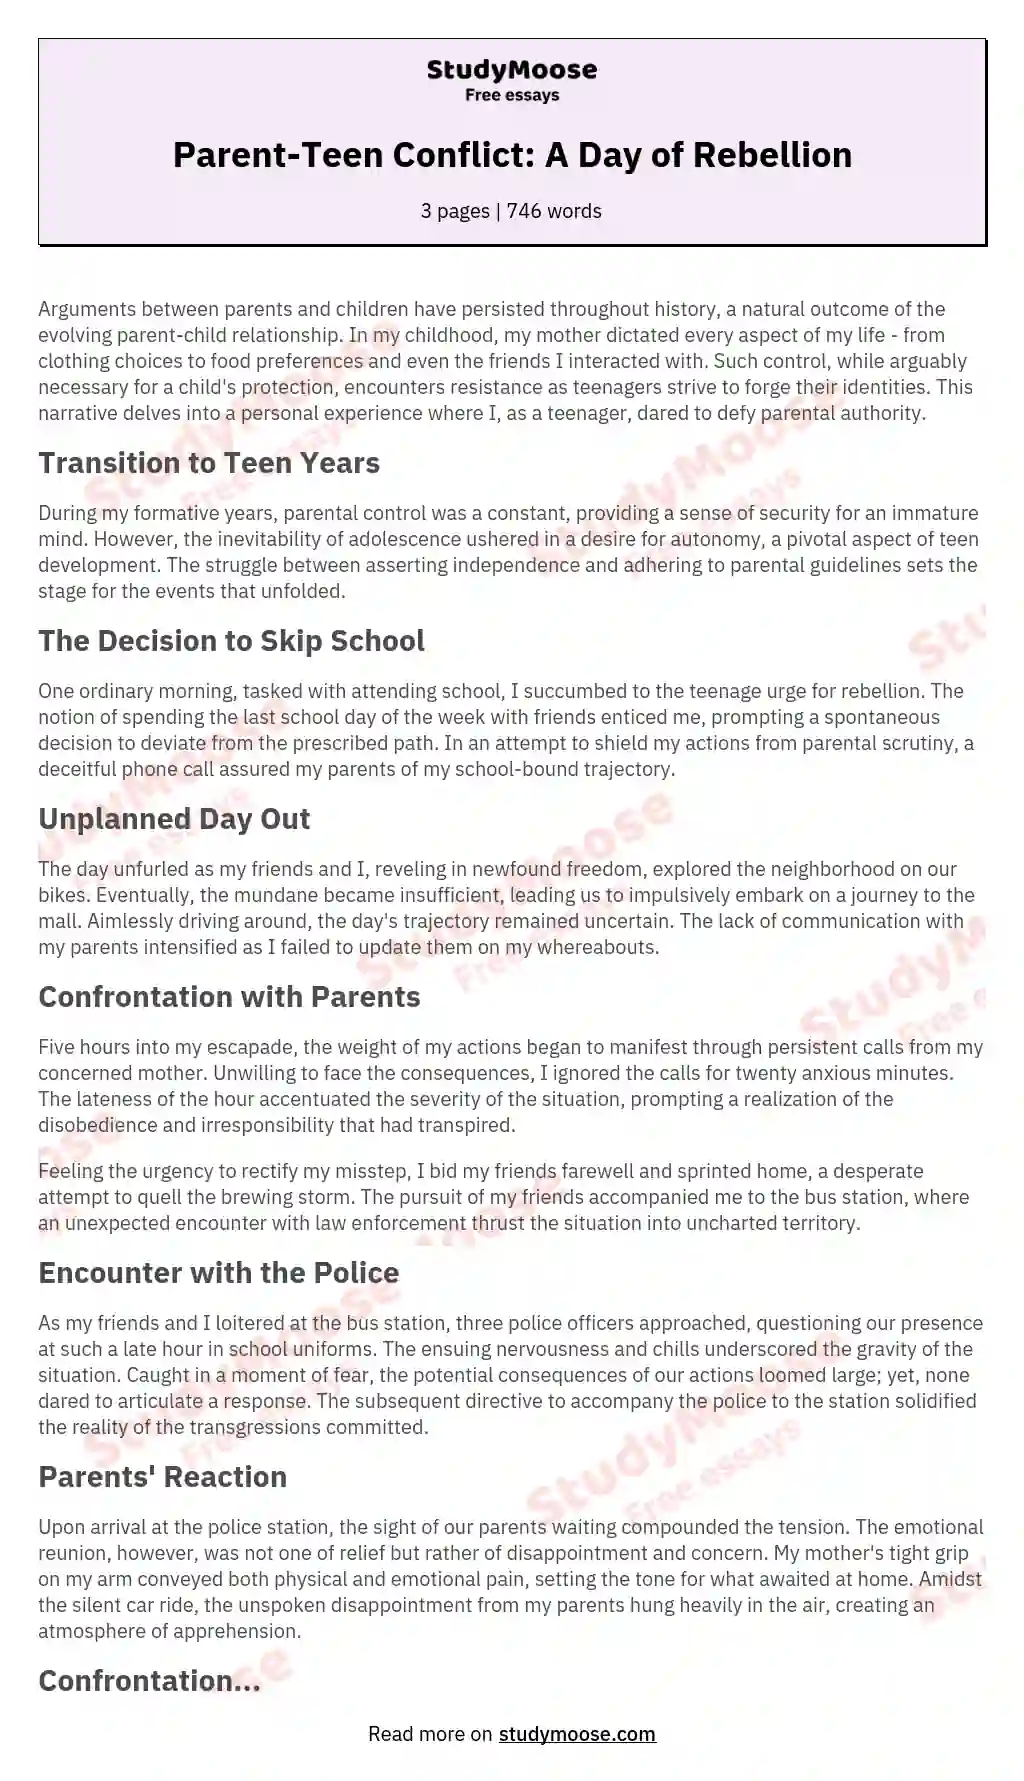 Parent-Teen Conflict: A Day of Rebellion essay